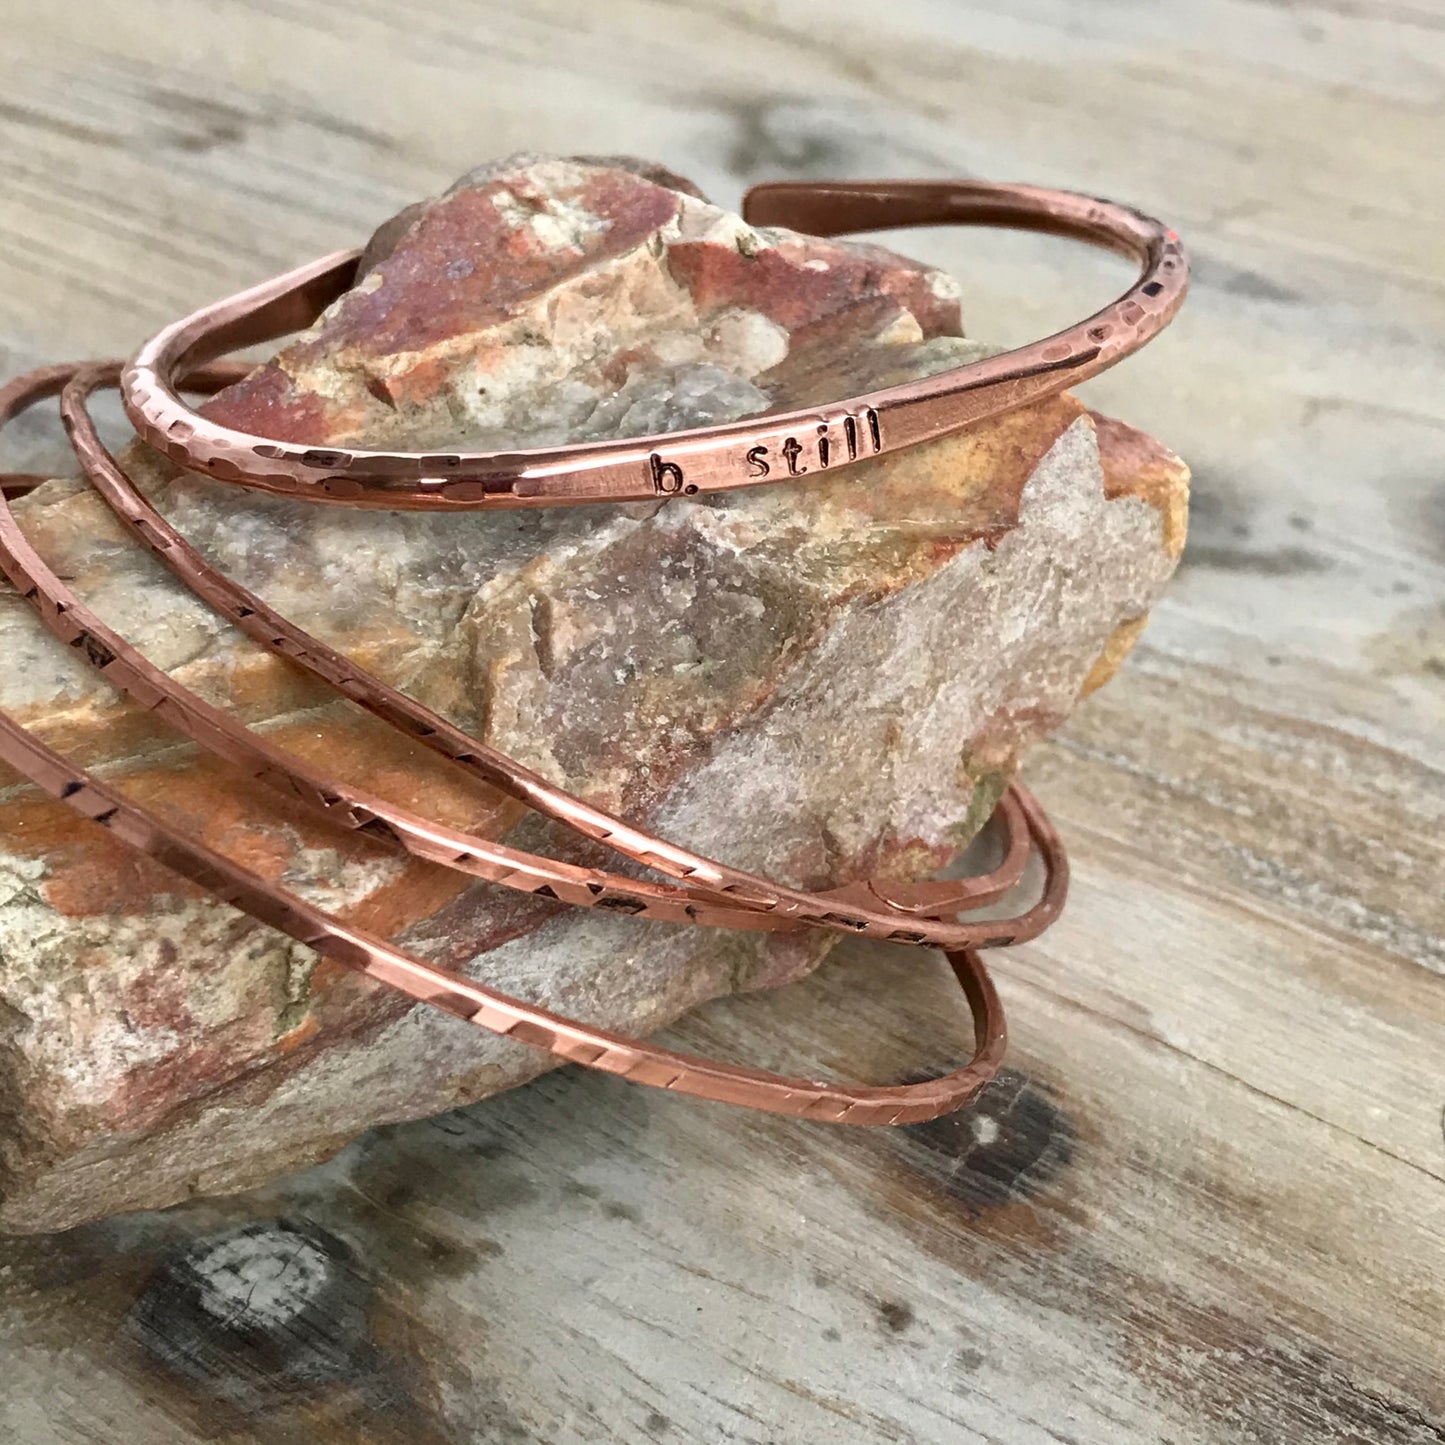 Set of Three "one of a kind" Copper Bangles